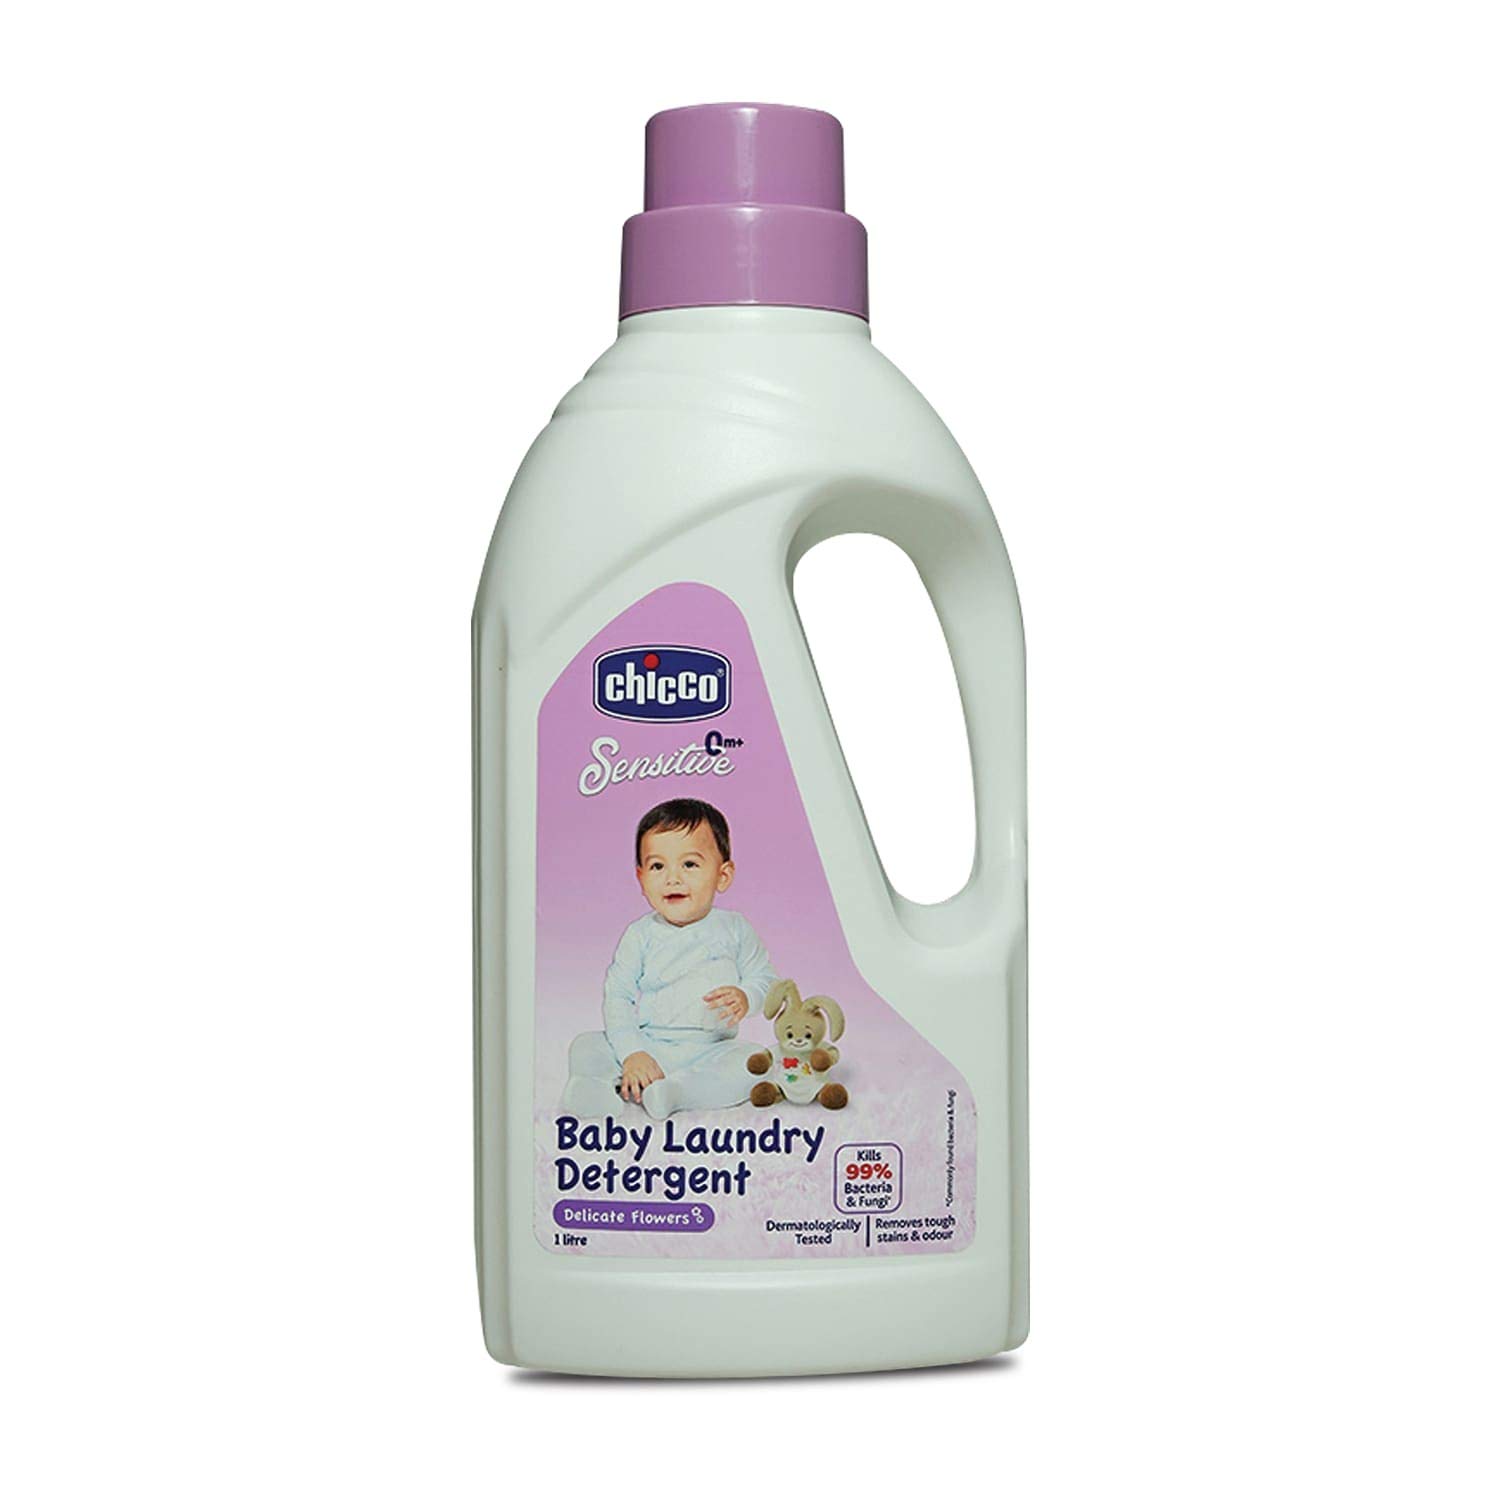 Baby Laundry Detergent (Delicate Flowers) (1L)-1000 Ml